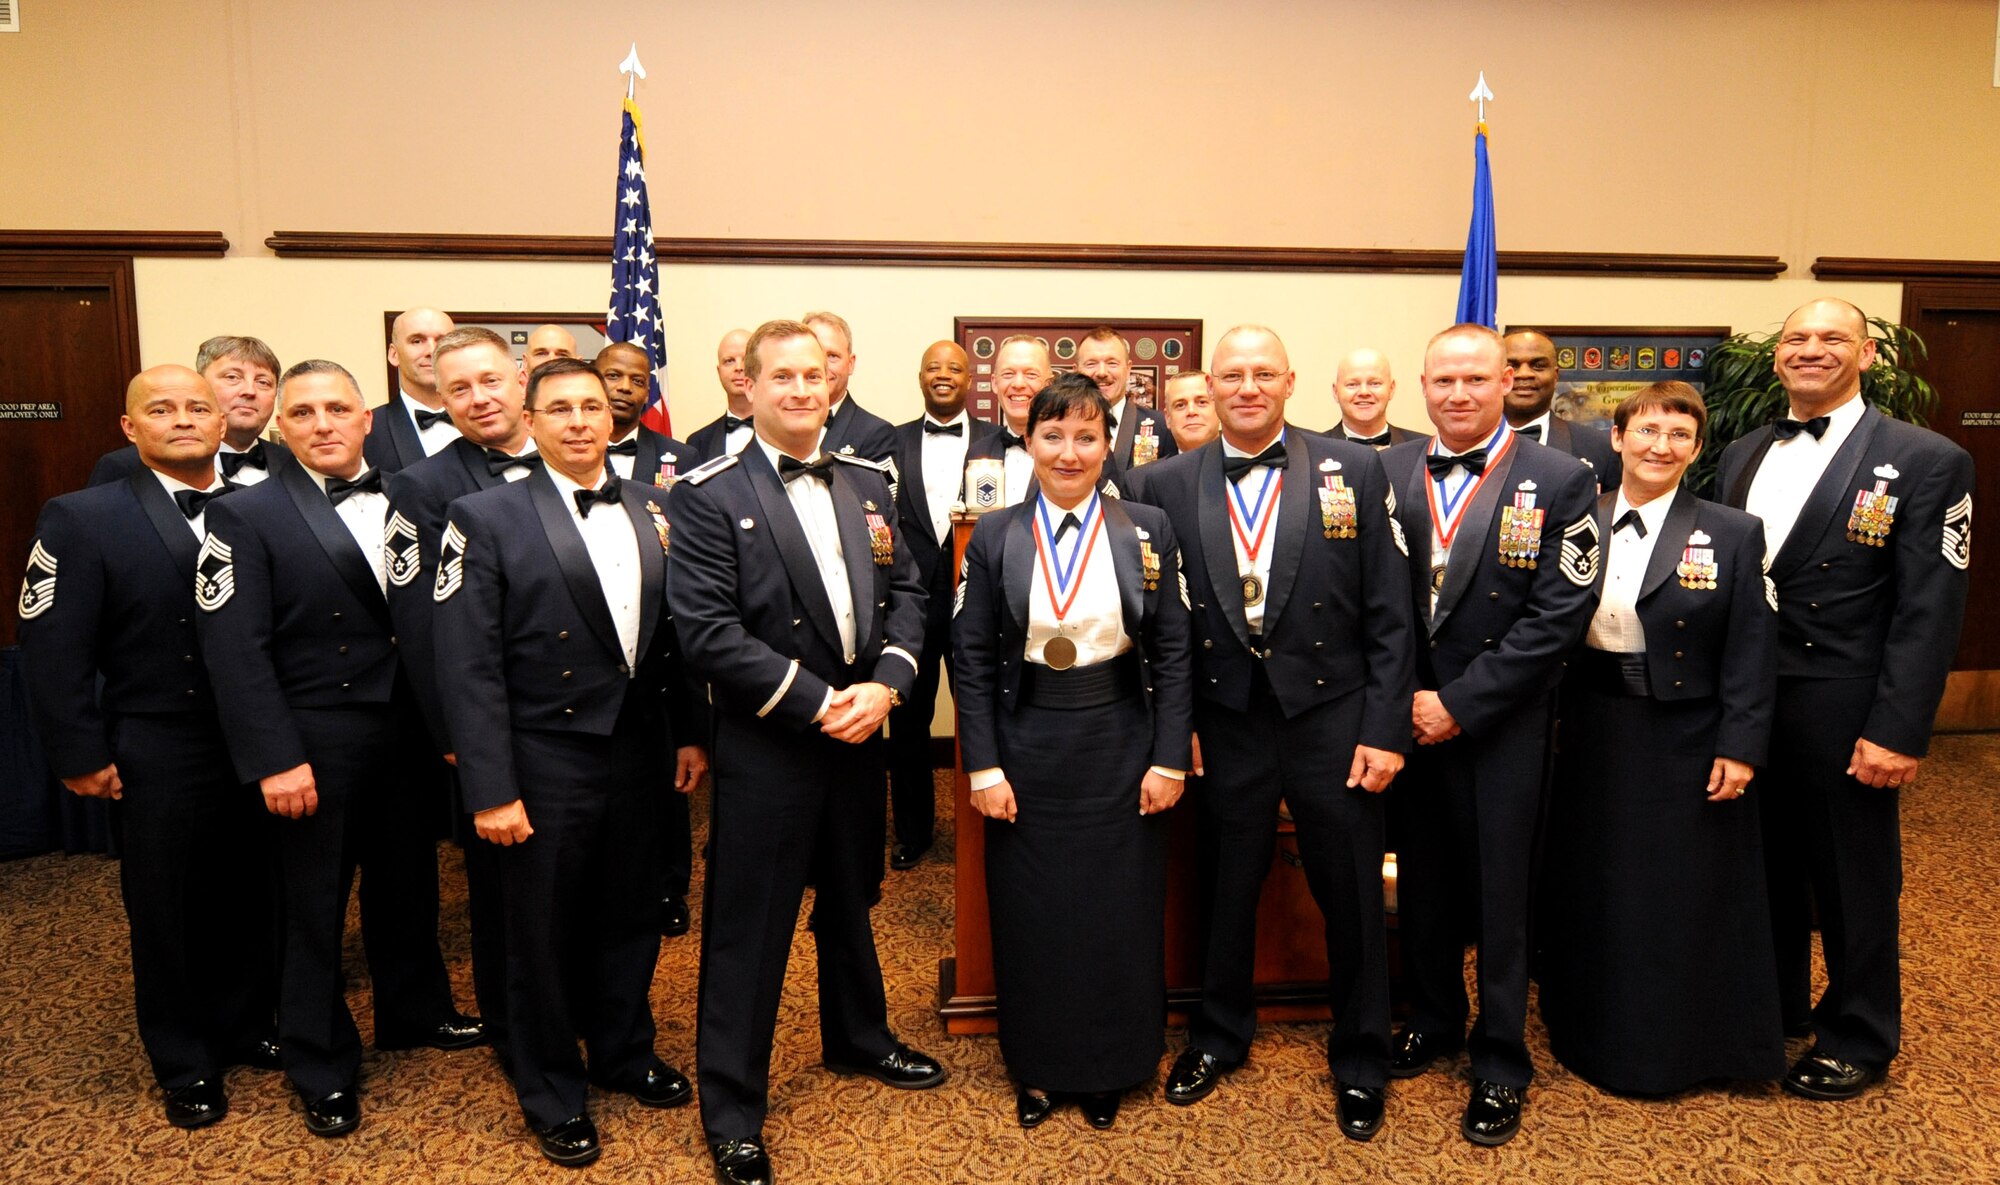 Col. Phil Stewart (middle front), 9th Reconnaissance Wing commander, and Chief Master Sgt. Robert White (far right), 9th Reconnaissance Wing command chief, pose with a collection of chief master sergeants near the end of the Chief Recognition Ceremony at the Recce Point Club on Beale Air Force Base, Calif., April 8, 2013. Chief Master Sgt. Geri Dreibelbis, 9th Security Forces Squadron security forces manager, Chief Master Sgt. Thomas Jenkins, 12th Aircraft Maintenance Unit superintendant, and Chief Master Sgt. Aaron Renn, 99th Aircraft Maintenance Unit superintendant, were recognized for achieving the highest enlisted rank. (U.S. Air Force photo by Airman 1st Class Bobby Cummings/Released)